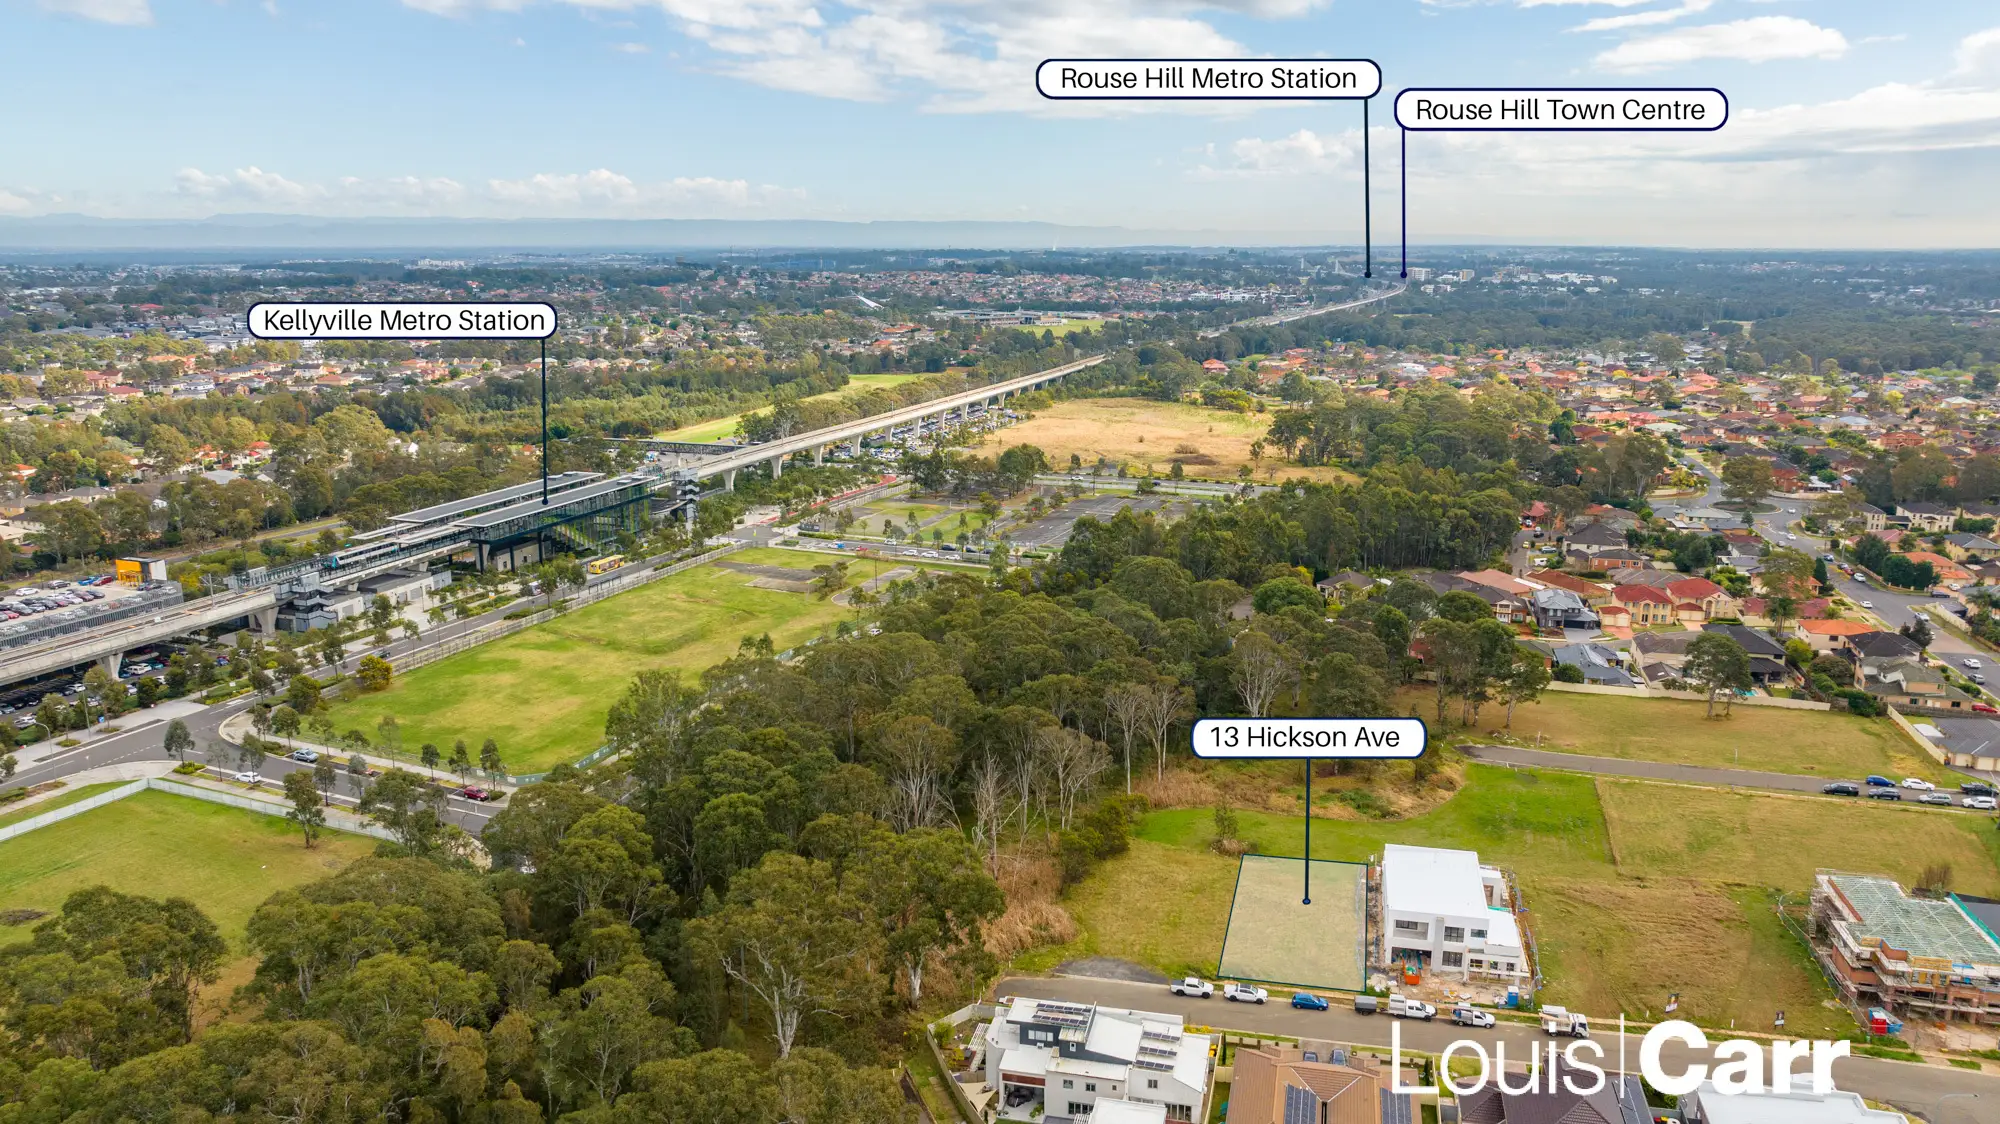 Photo #6: 13 Hickson Avenue, Kellyville - For Sale by Louis Carr Real Estate